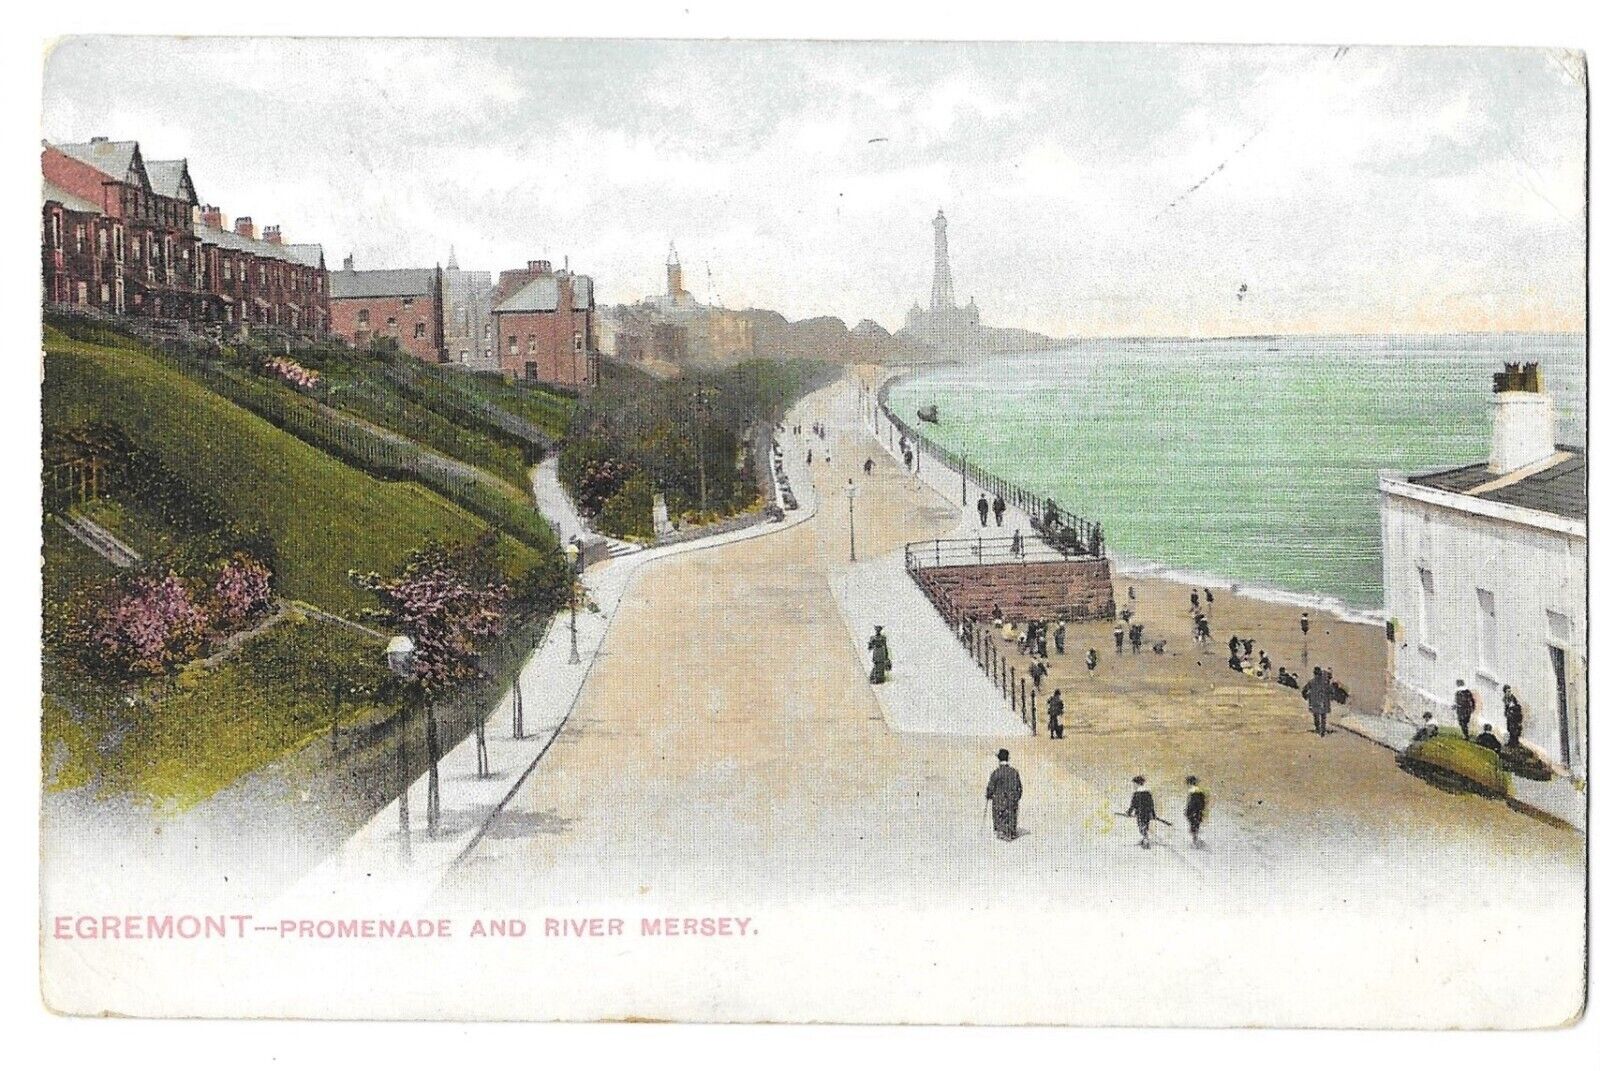 House Clearance - Egremont - Promenade and River Mersey - Service - Posted - Wilson Series